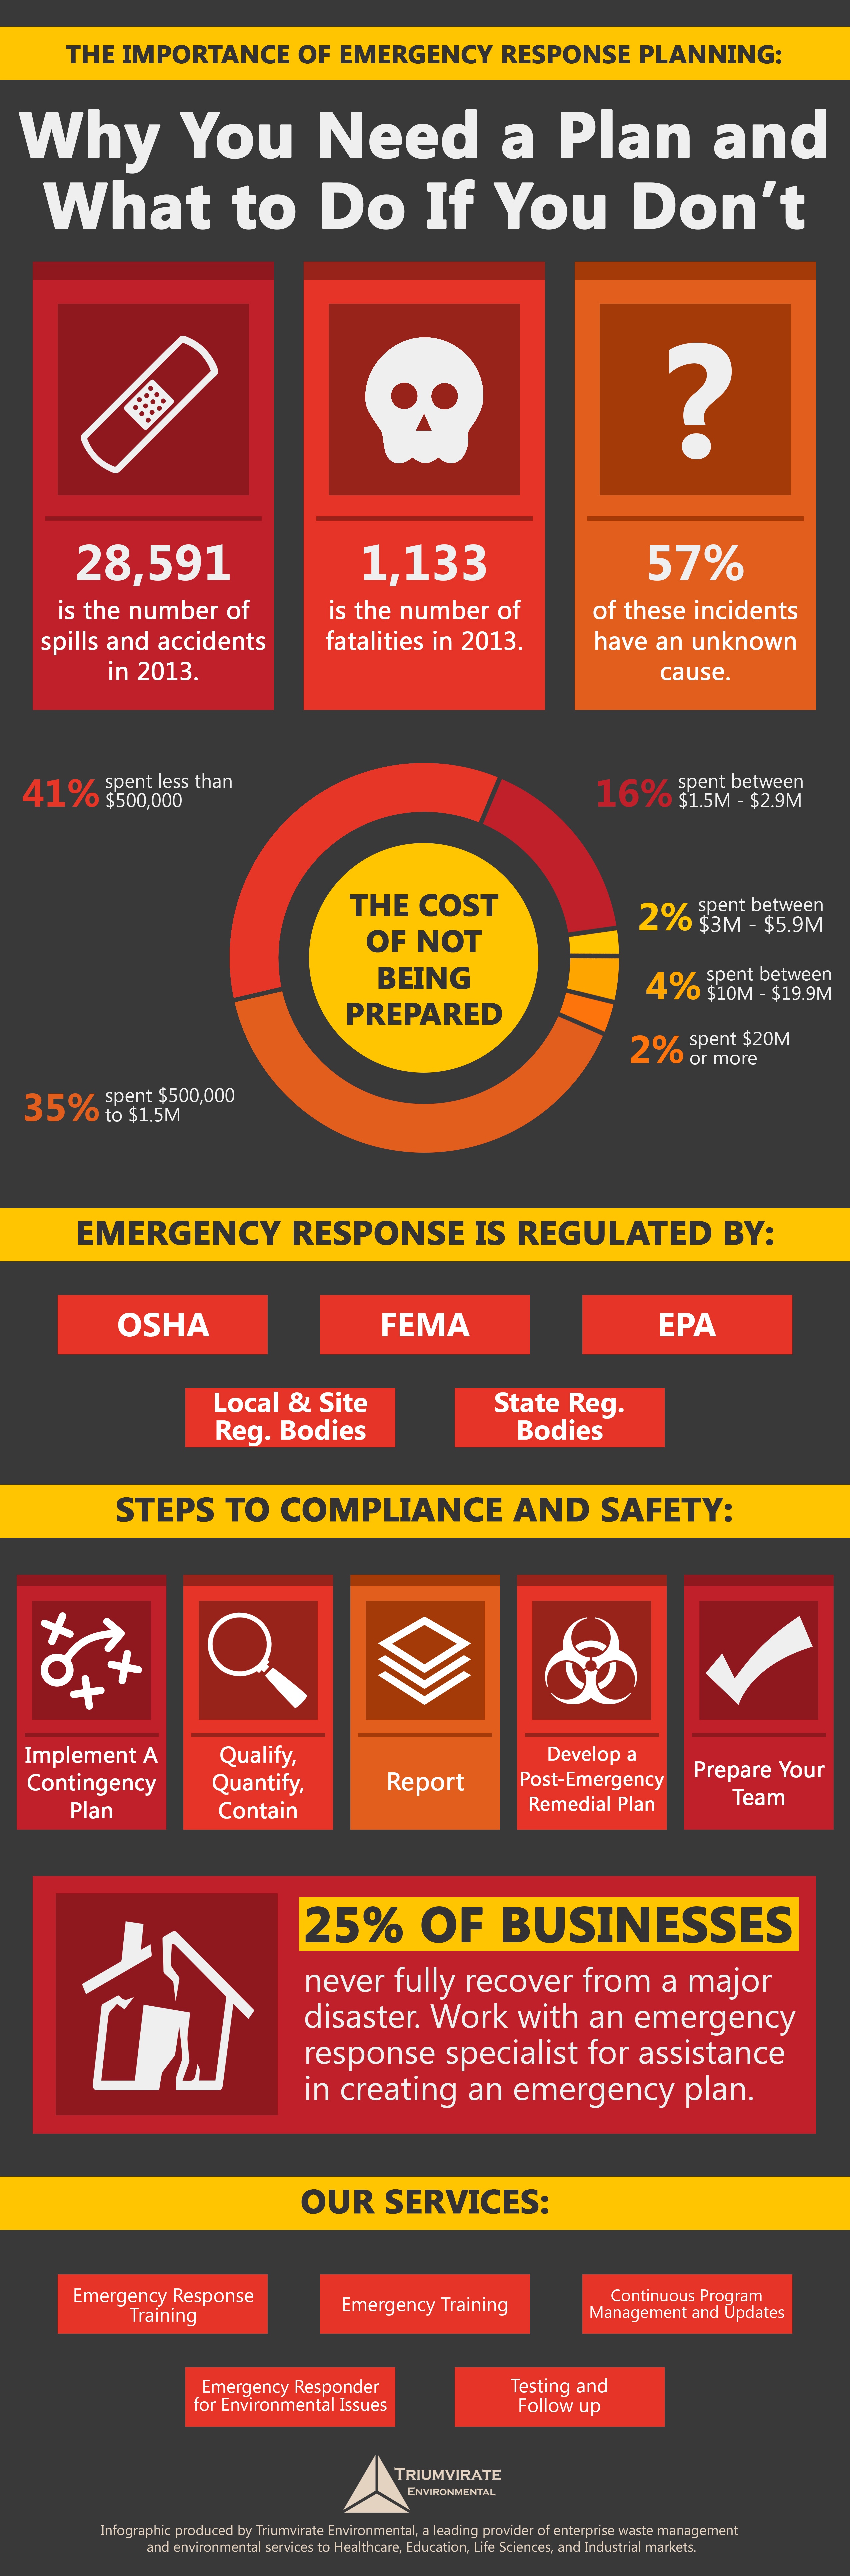 Importance of emergency response planning infographic